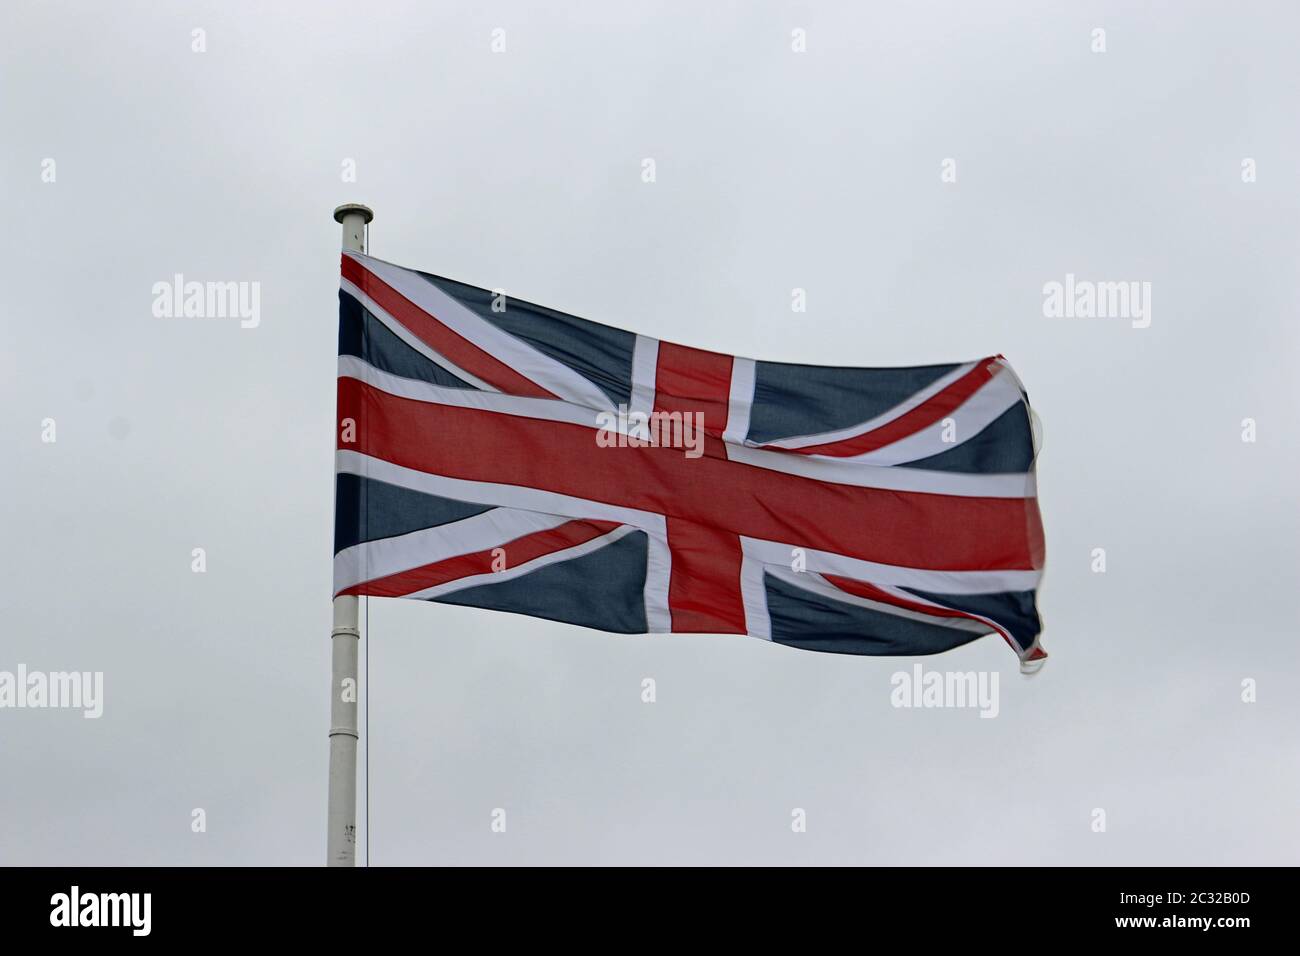 Union Jack flag fluttering in the wind on a white flagpole with a grey sky background. Stock Photo